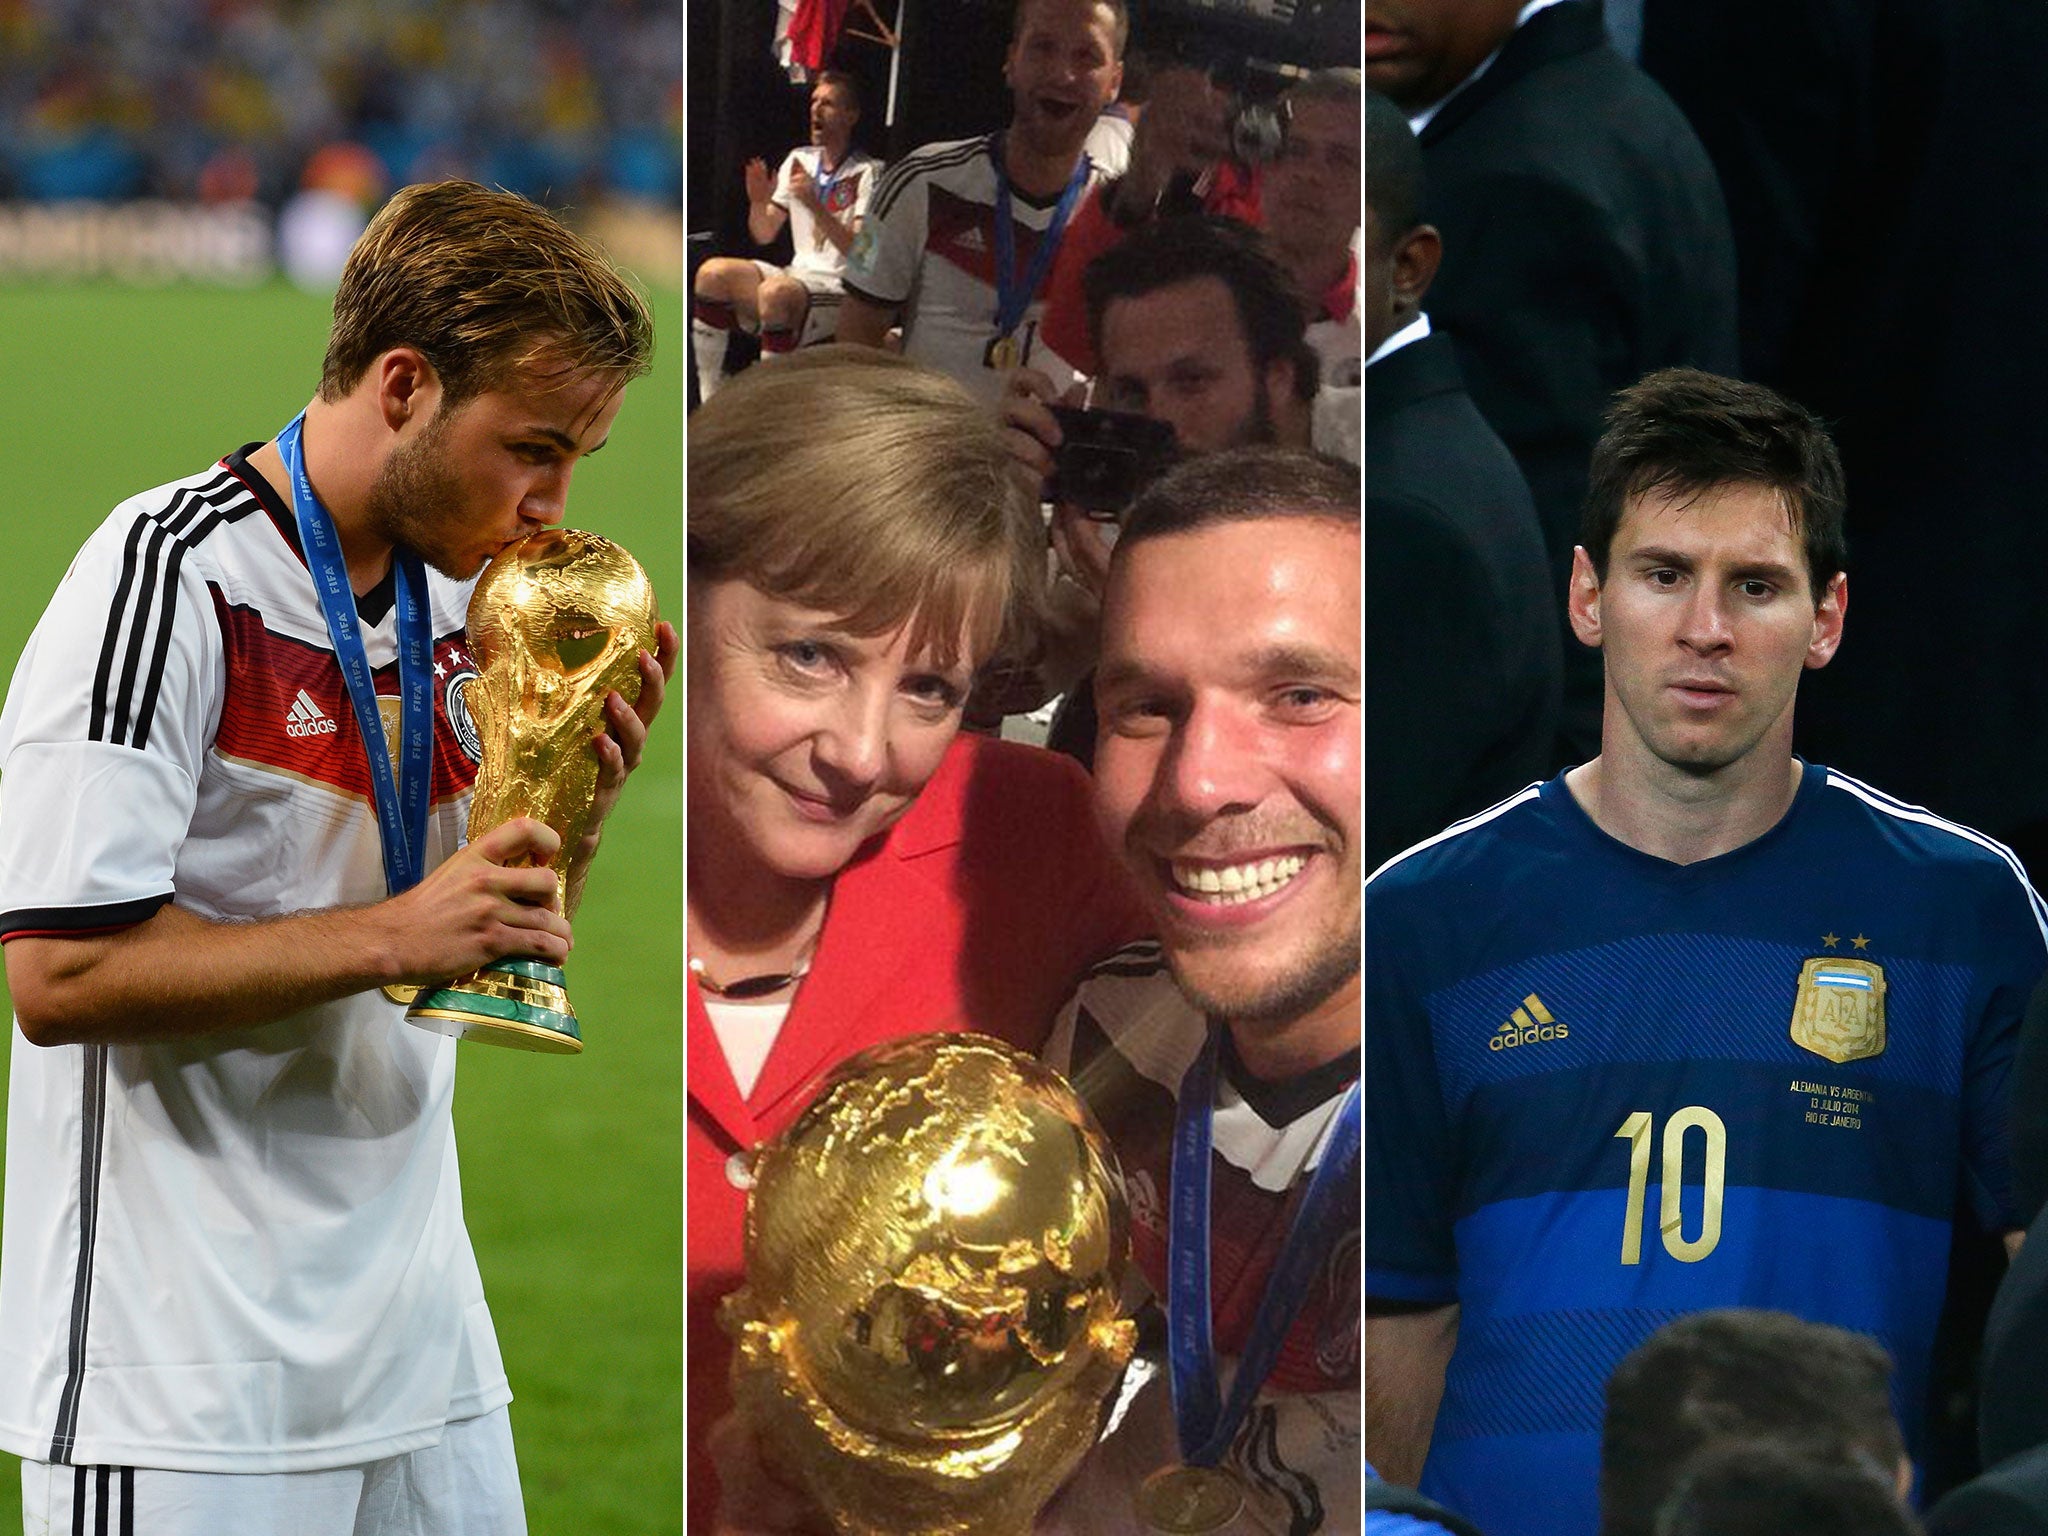 Mario Gotze kisses the World Cup, Andrea Merkel poses with Lukas Podolski, and Lionel Messi walks off the stage after Argentina's defeat